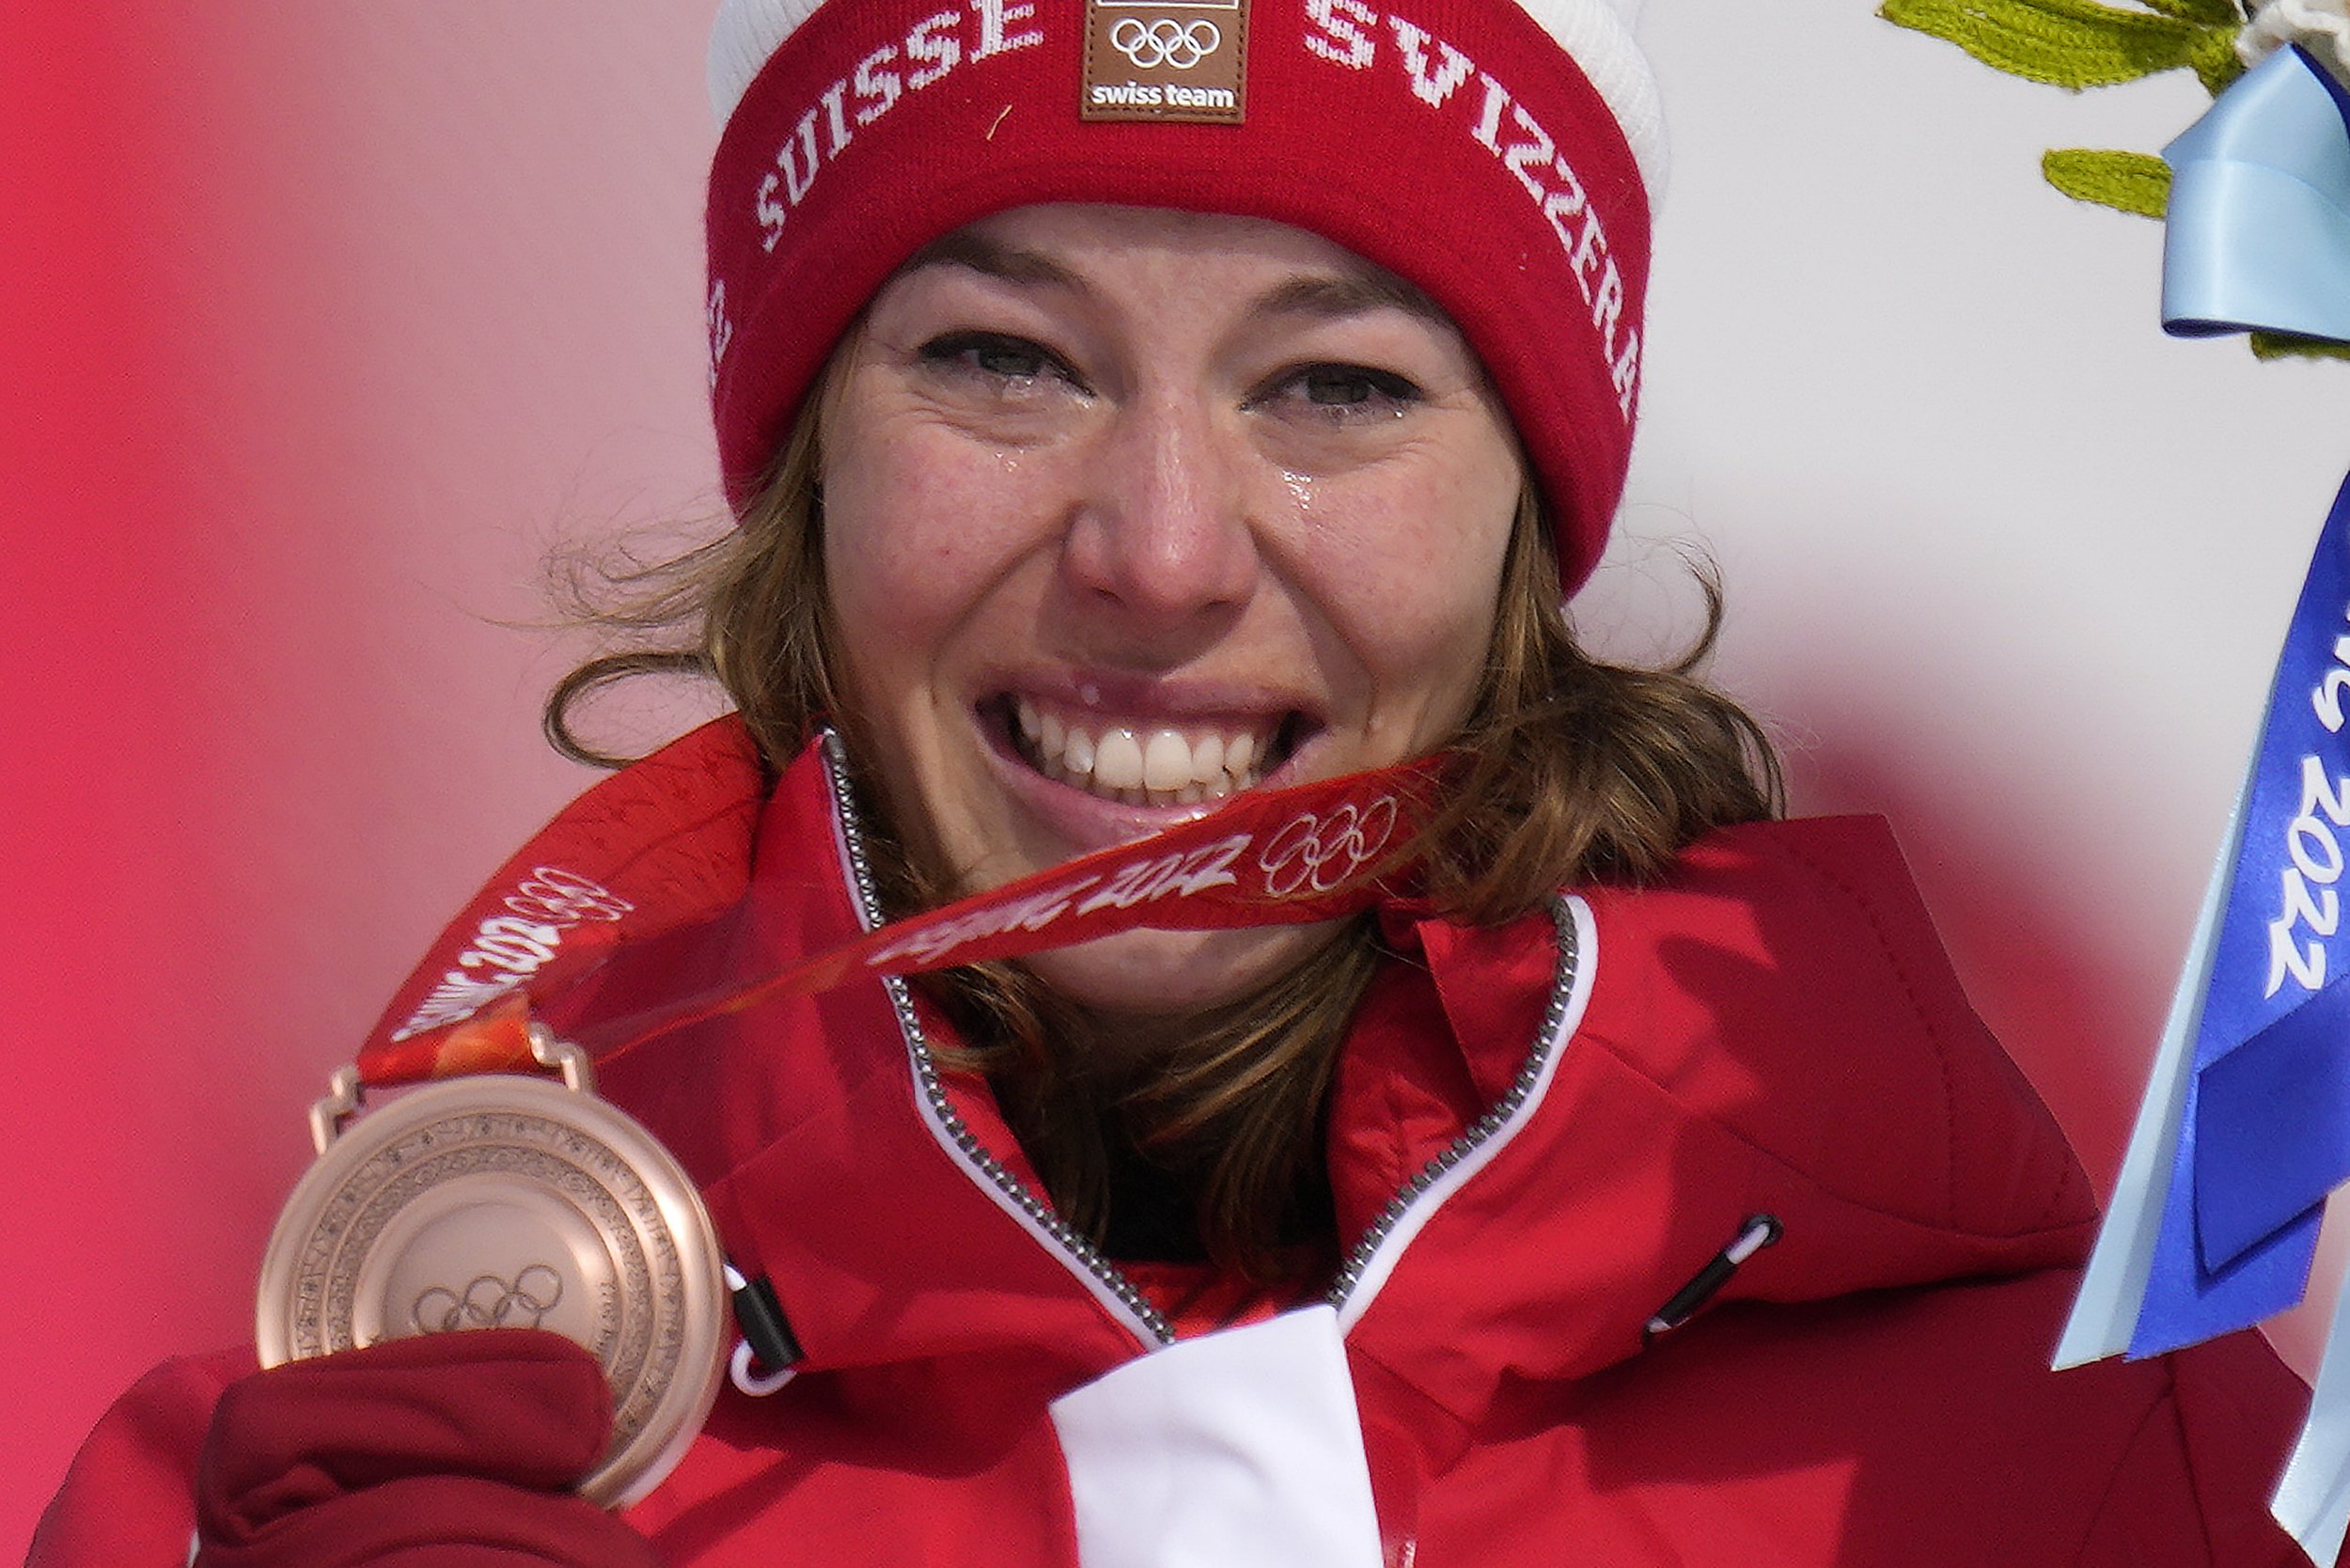  Michelle Gisin, of Switzerland, reacts during the medal ceremony after winning the bronze medal in the women's super-G at the 2022 Winter Olympics, Friday, Feb. 11, 2022, in the Yanqing district of Beijing. (AP Photo/Luca Bruno) 